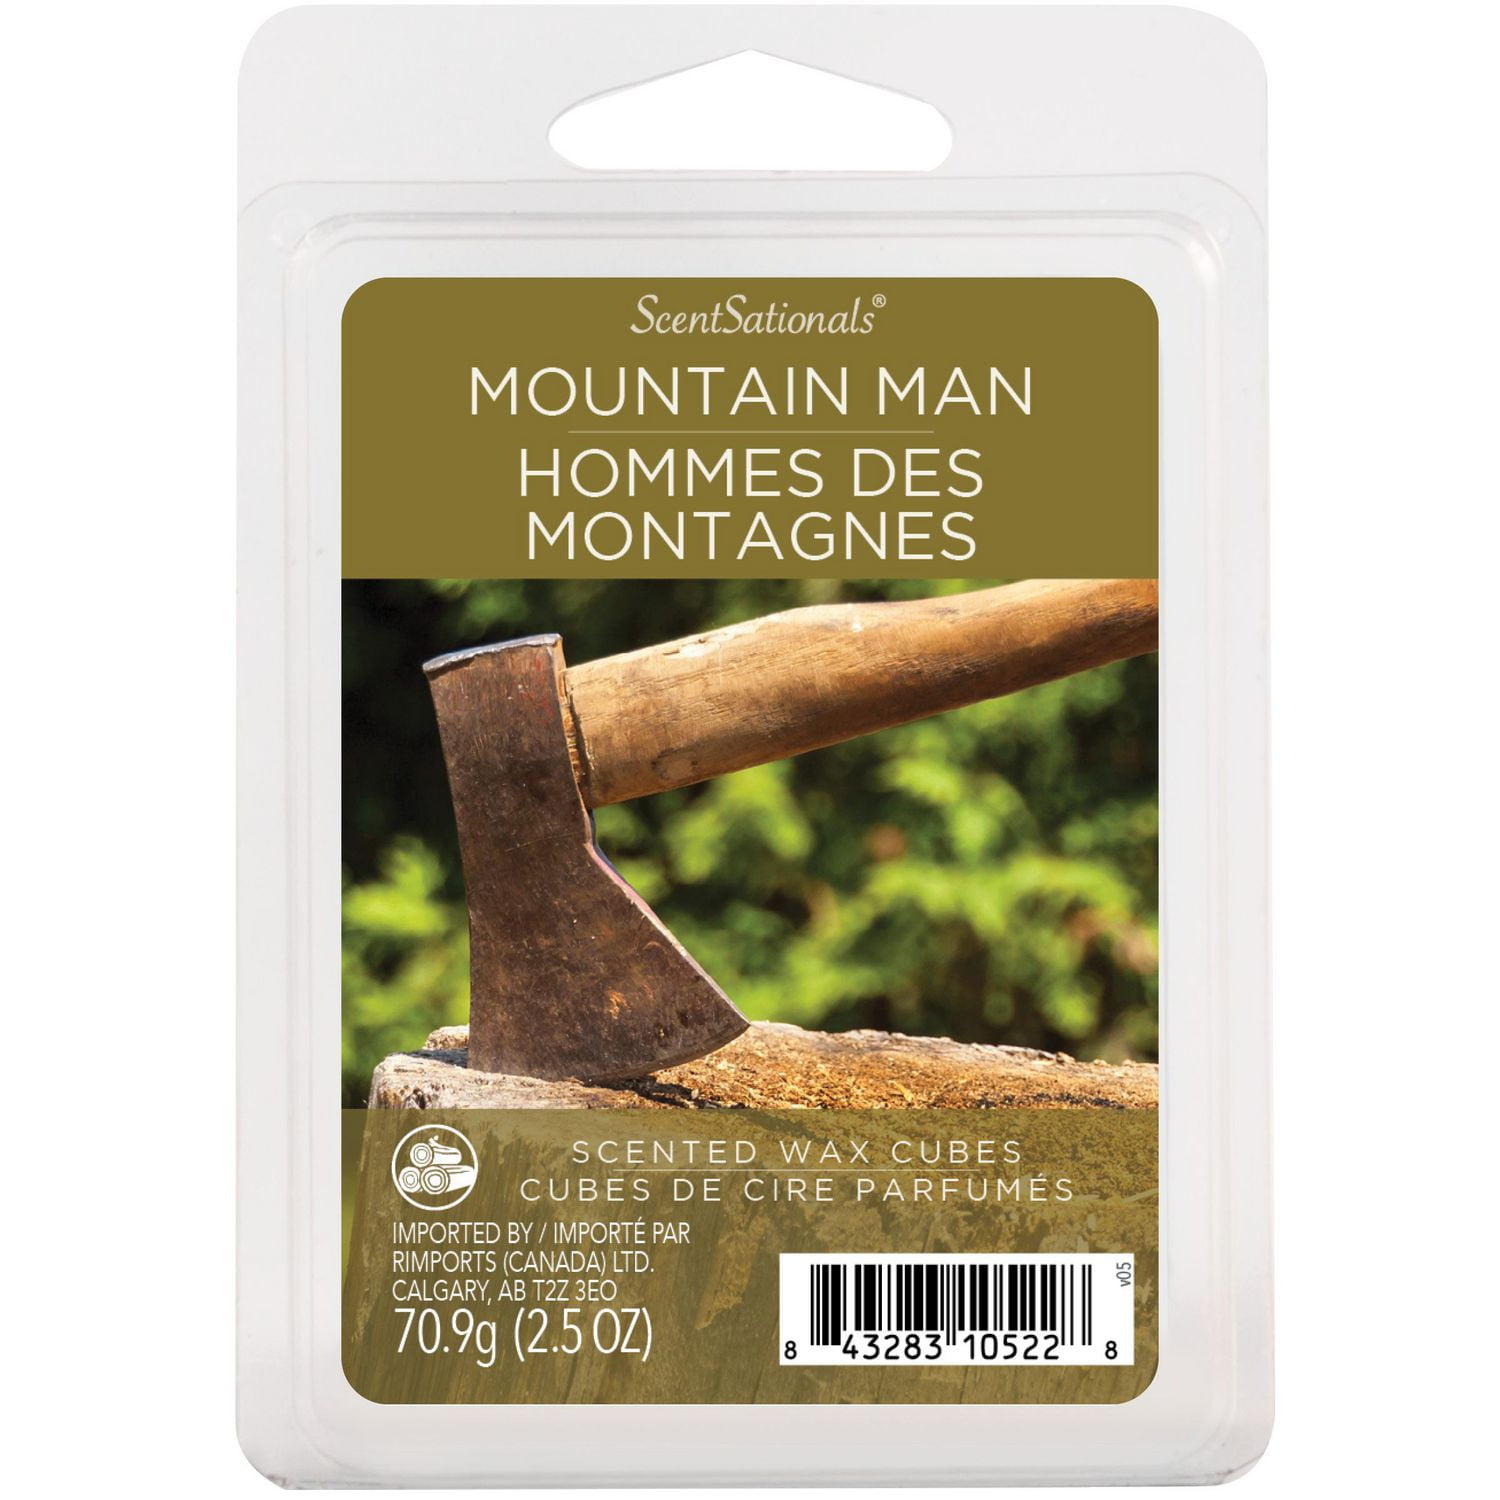 ScentSationals Scented Wax Cubes - Mountain Man, 2.5 oz (70.9 g) 